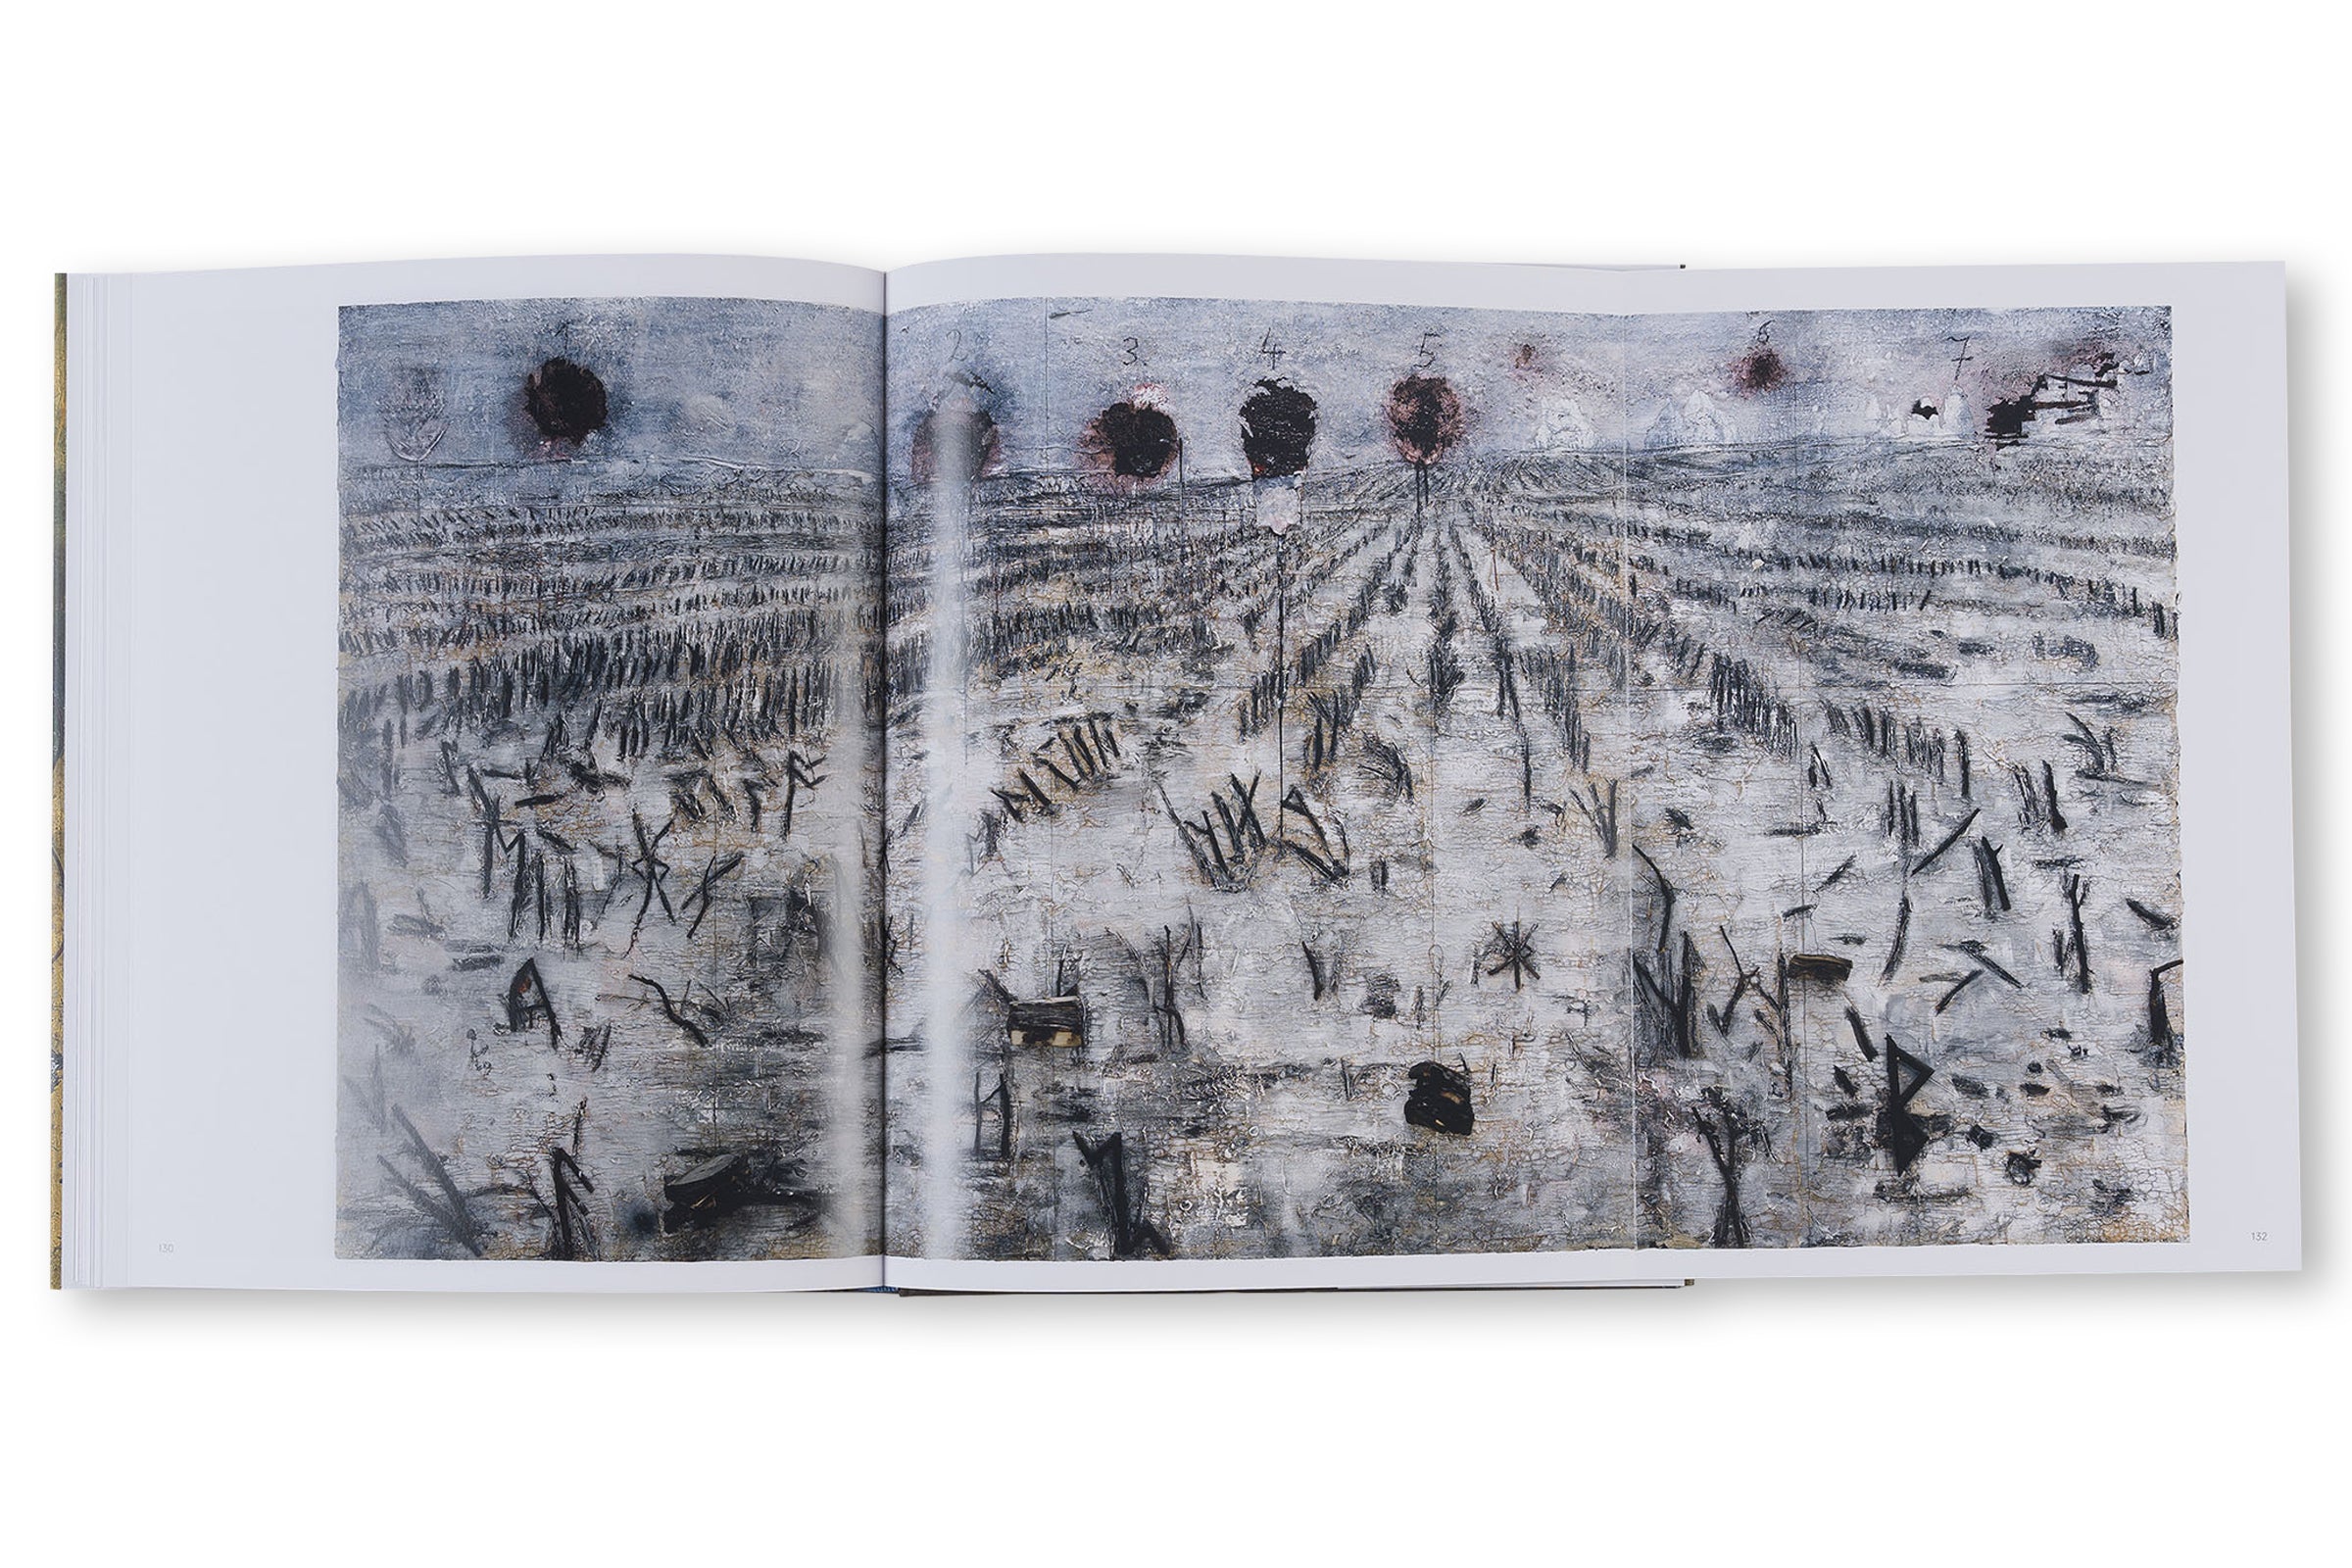 SUPERSTRINGS, RUNES, THE NORNS, GORDIAN KNOT by Anselm Kiefer